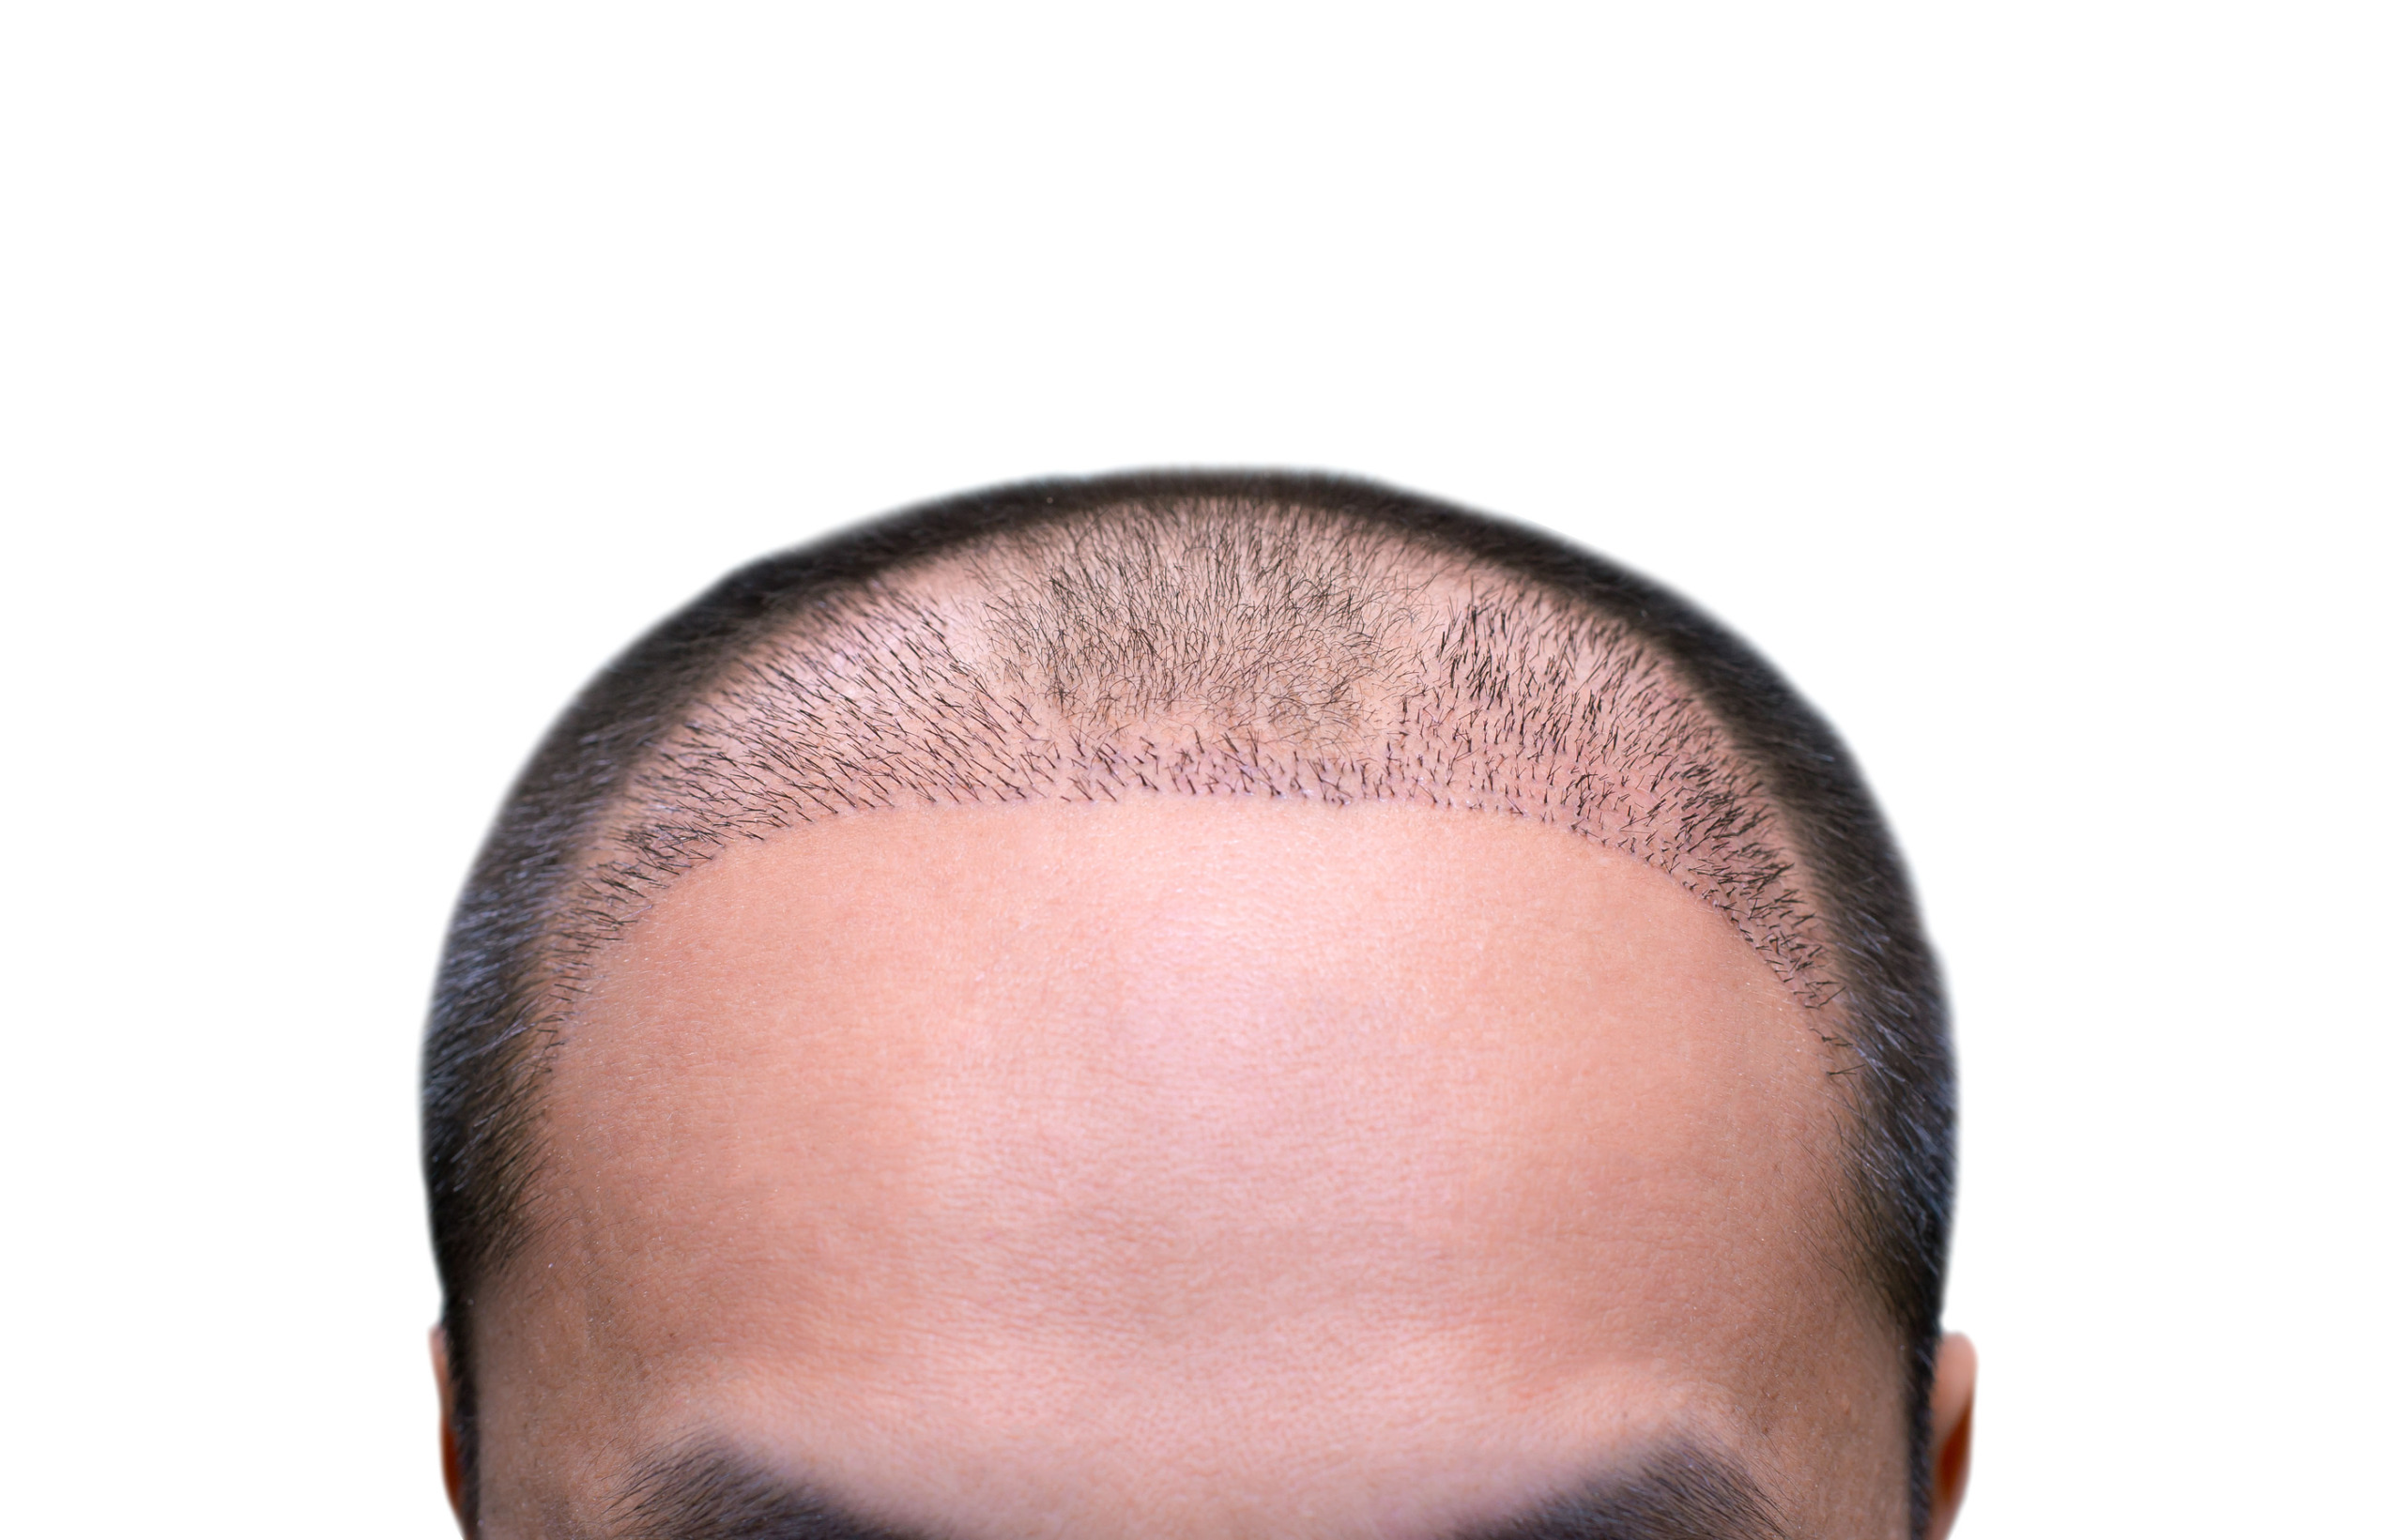 receding hairline after hair transplant surgery